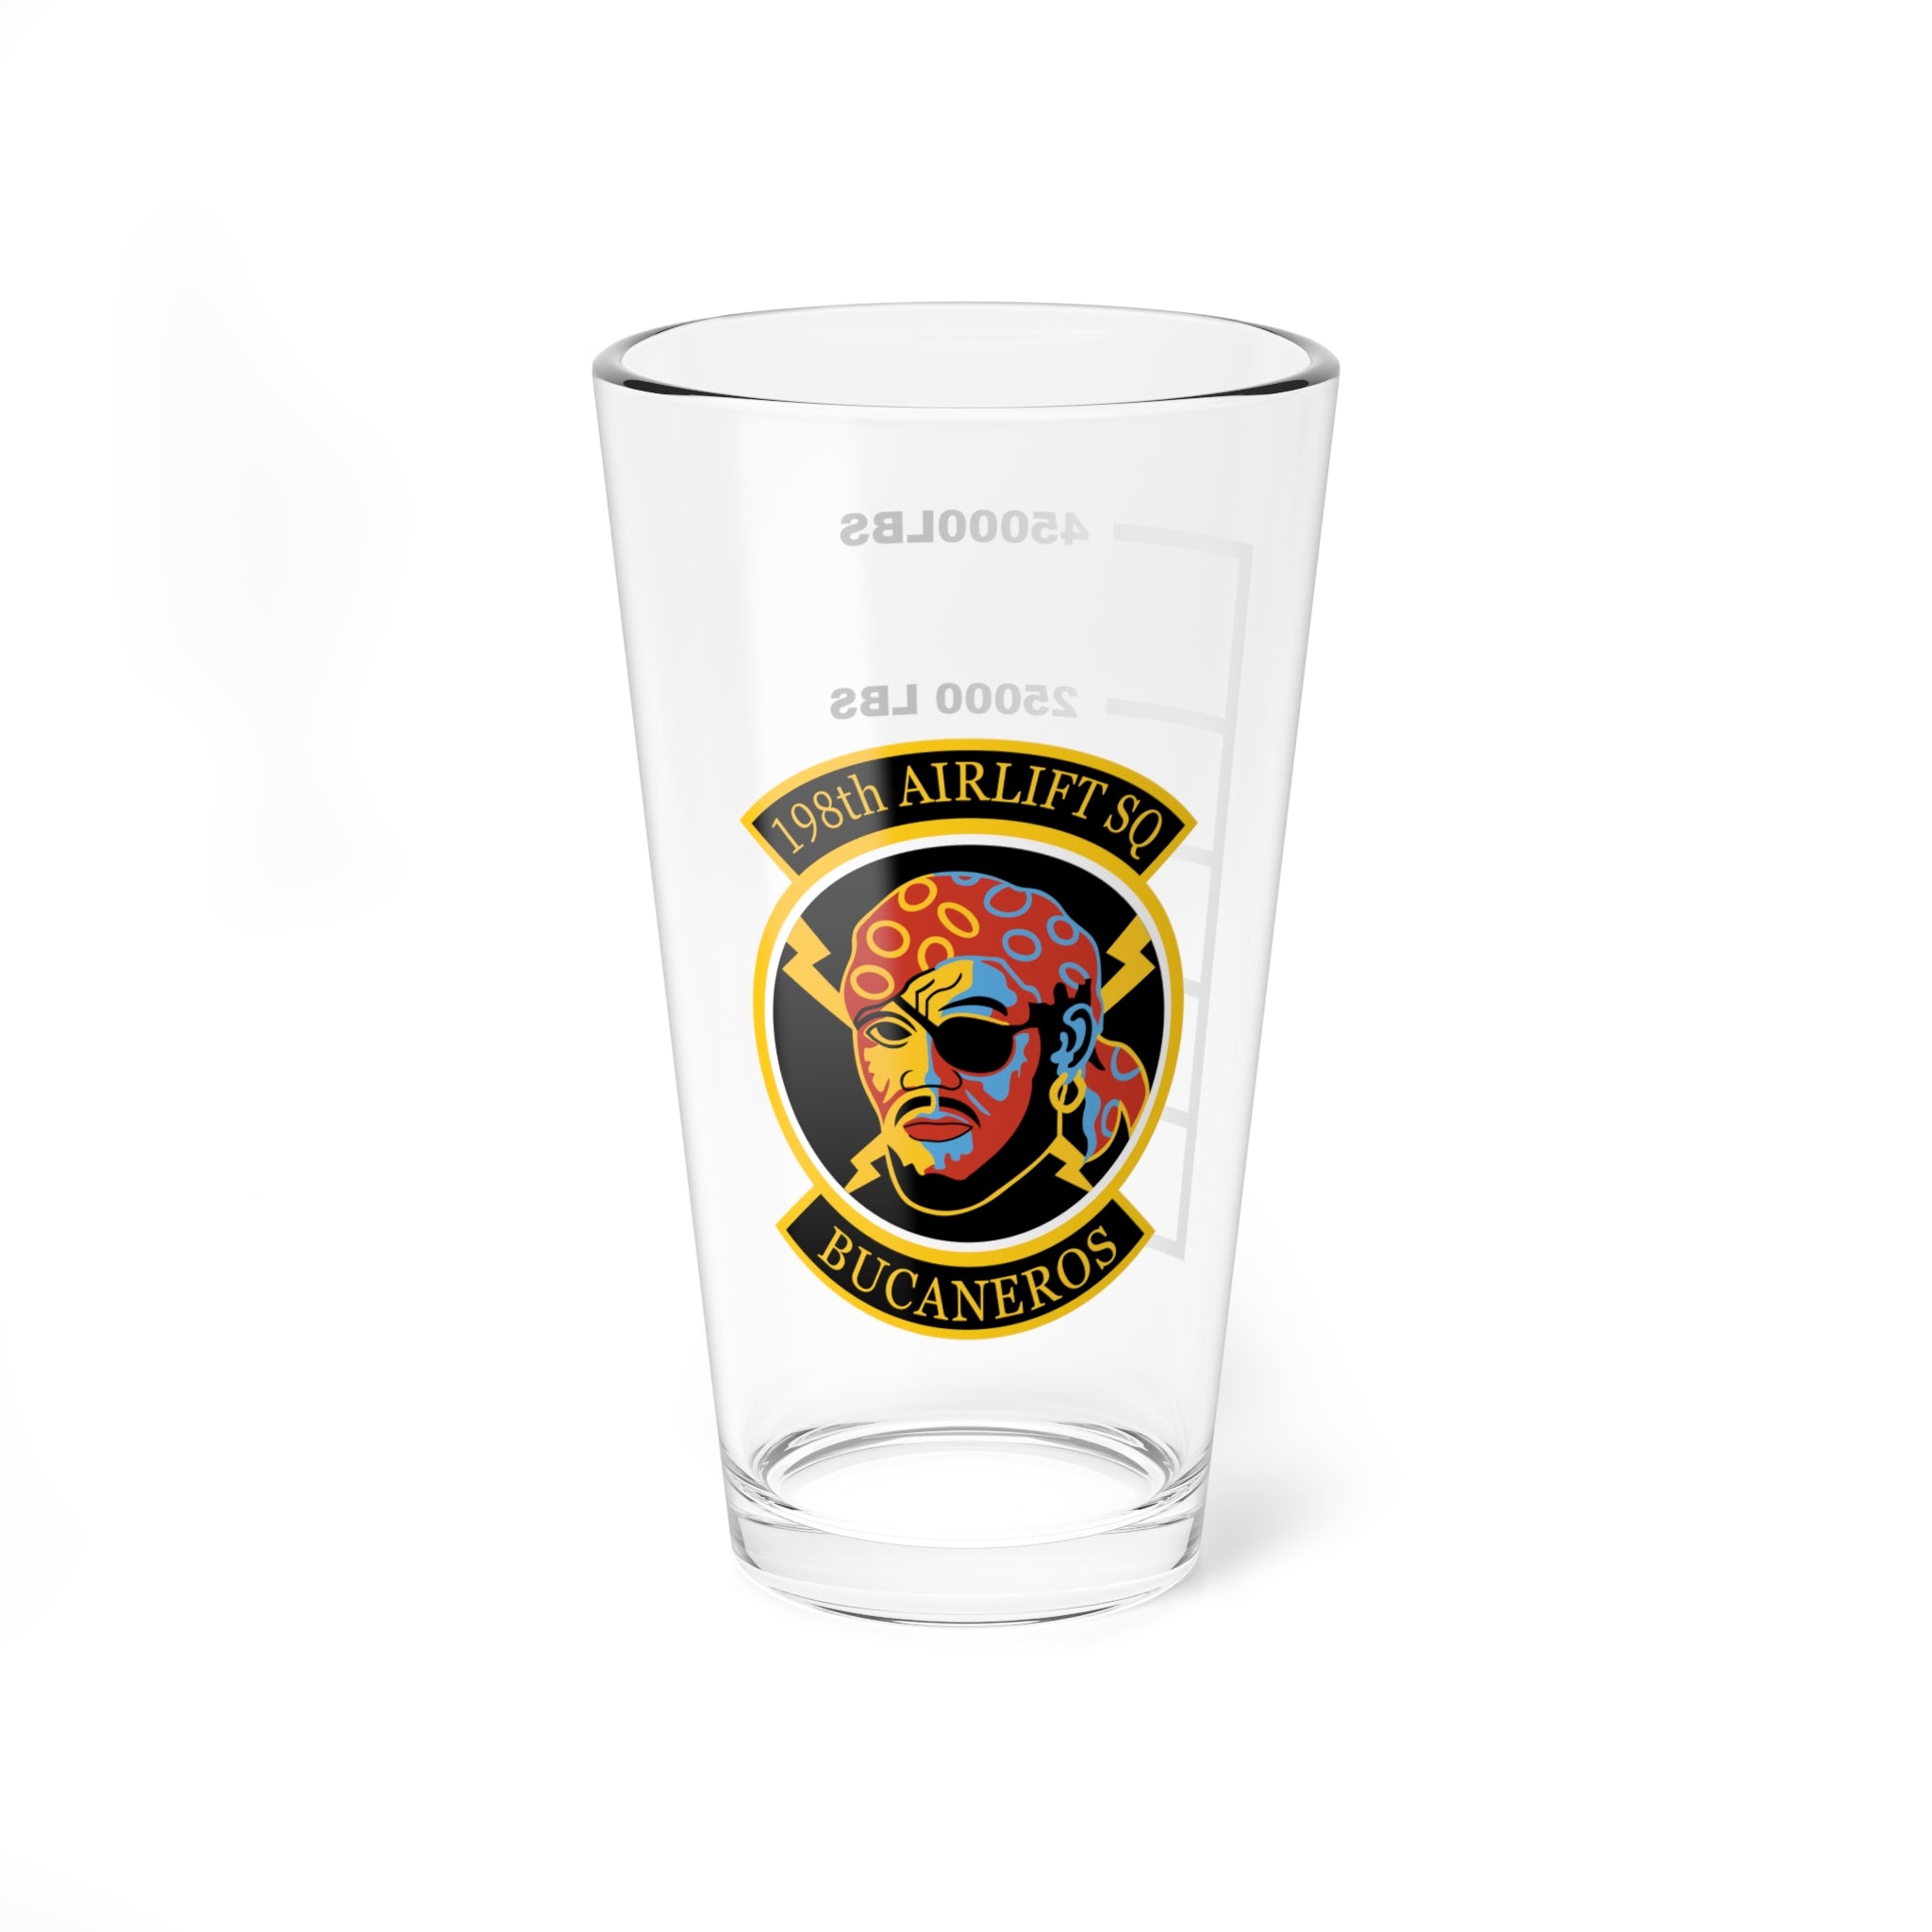 198th Airlift Squadron Fuel Low Pint Glass, US Air National Guard Squadron flying the C-130 Hercules